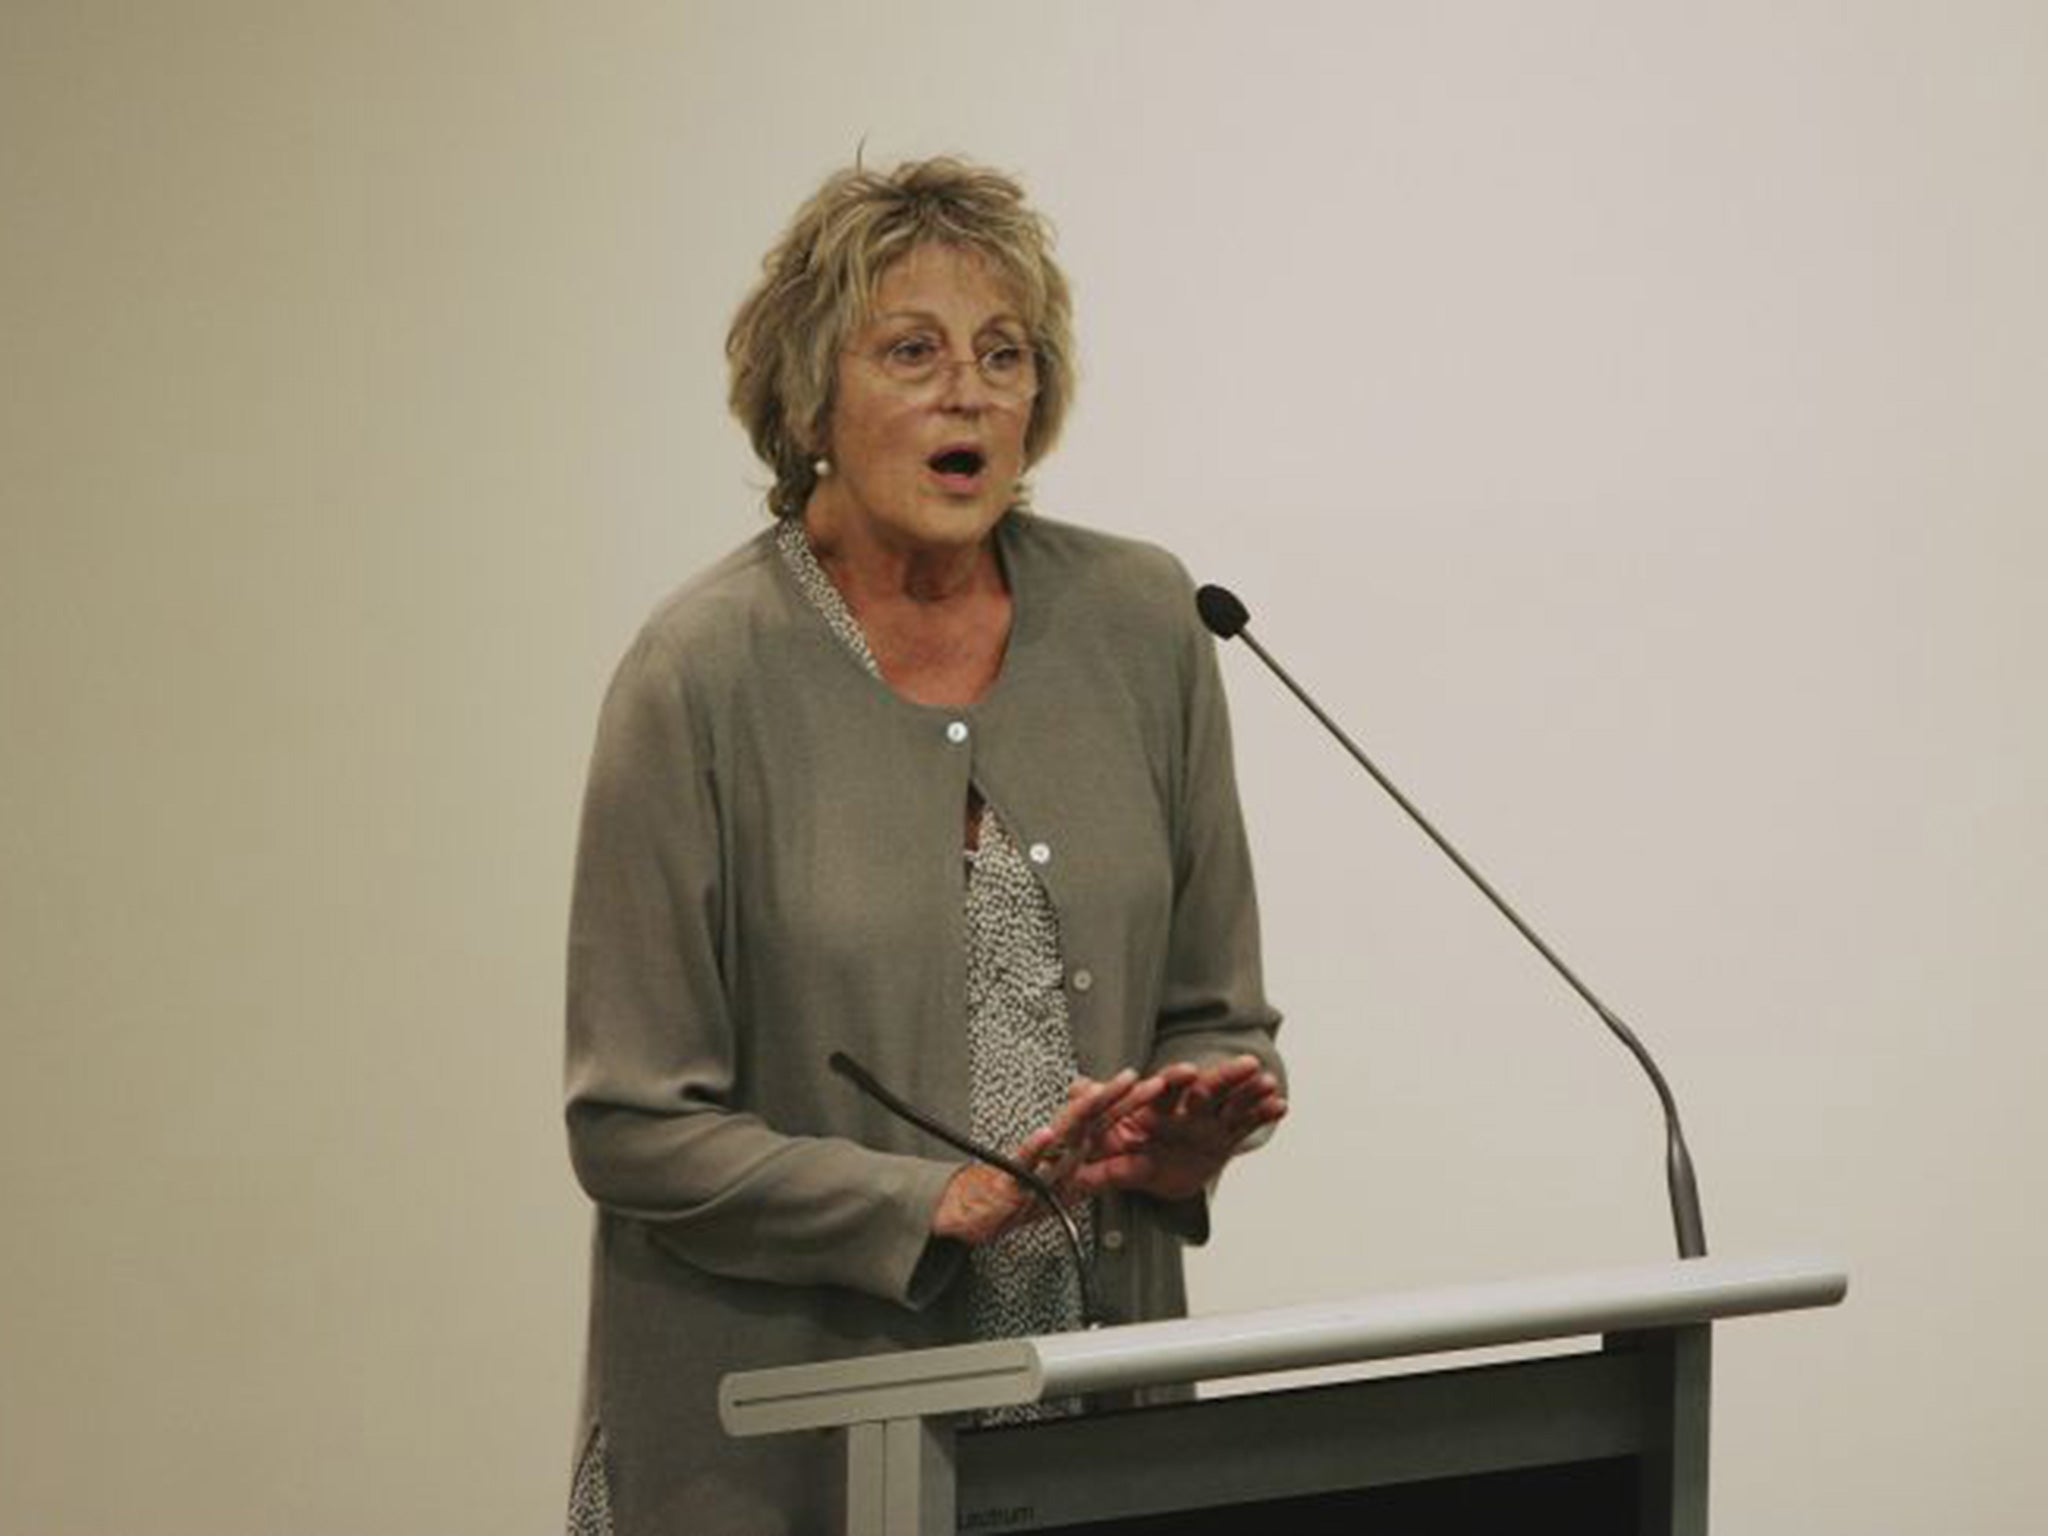 Germaine Greer: A ‘ball-breaker’ who could reduce male interviewers to jelly and enjoy it”